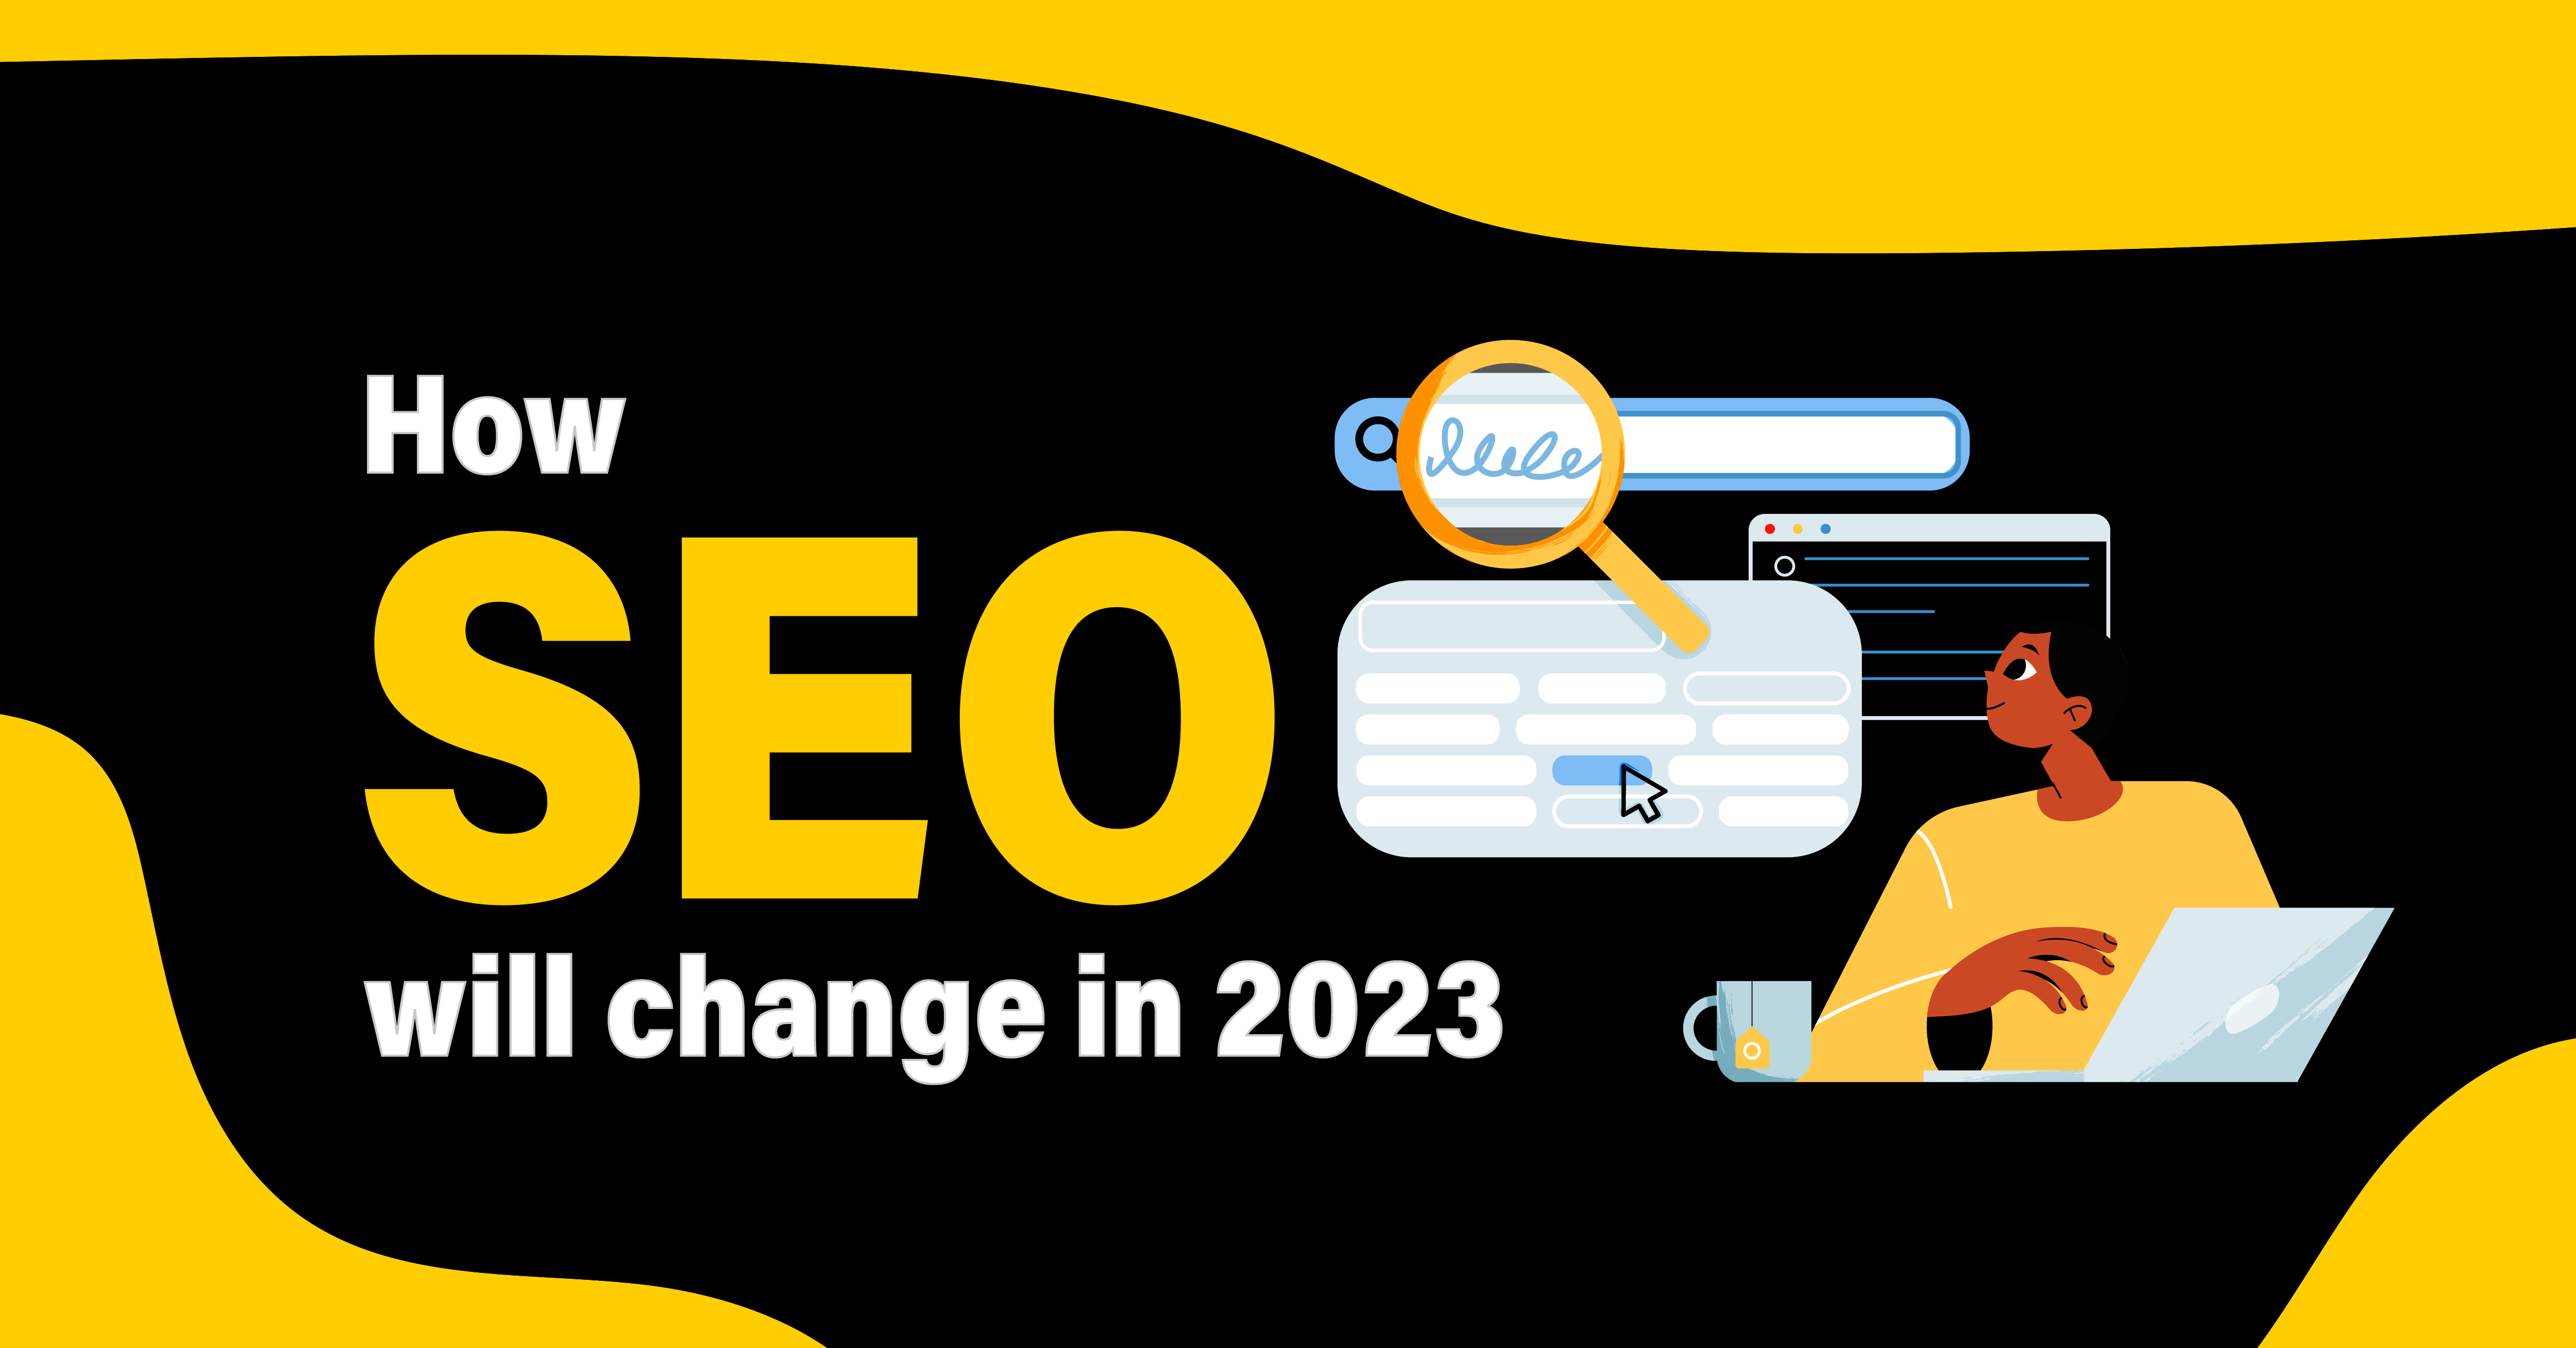 How SEO will change in 2023